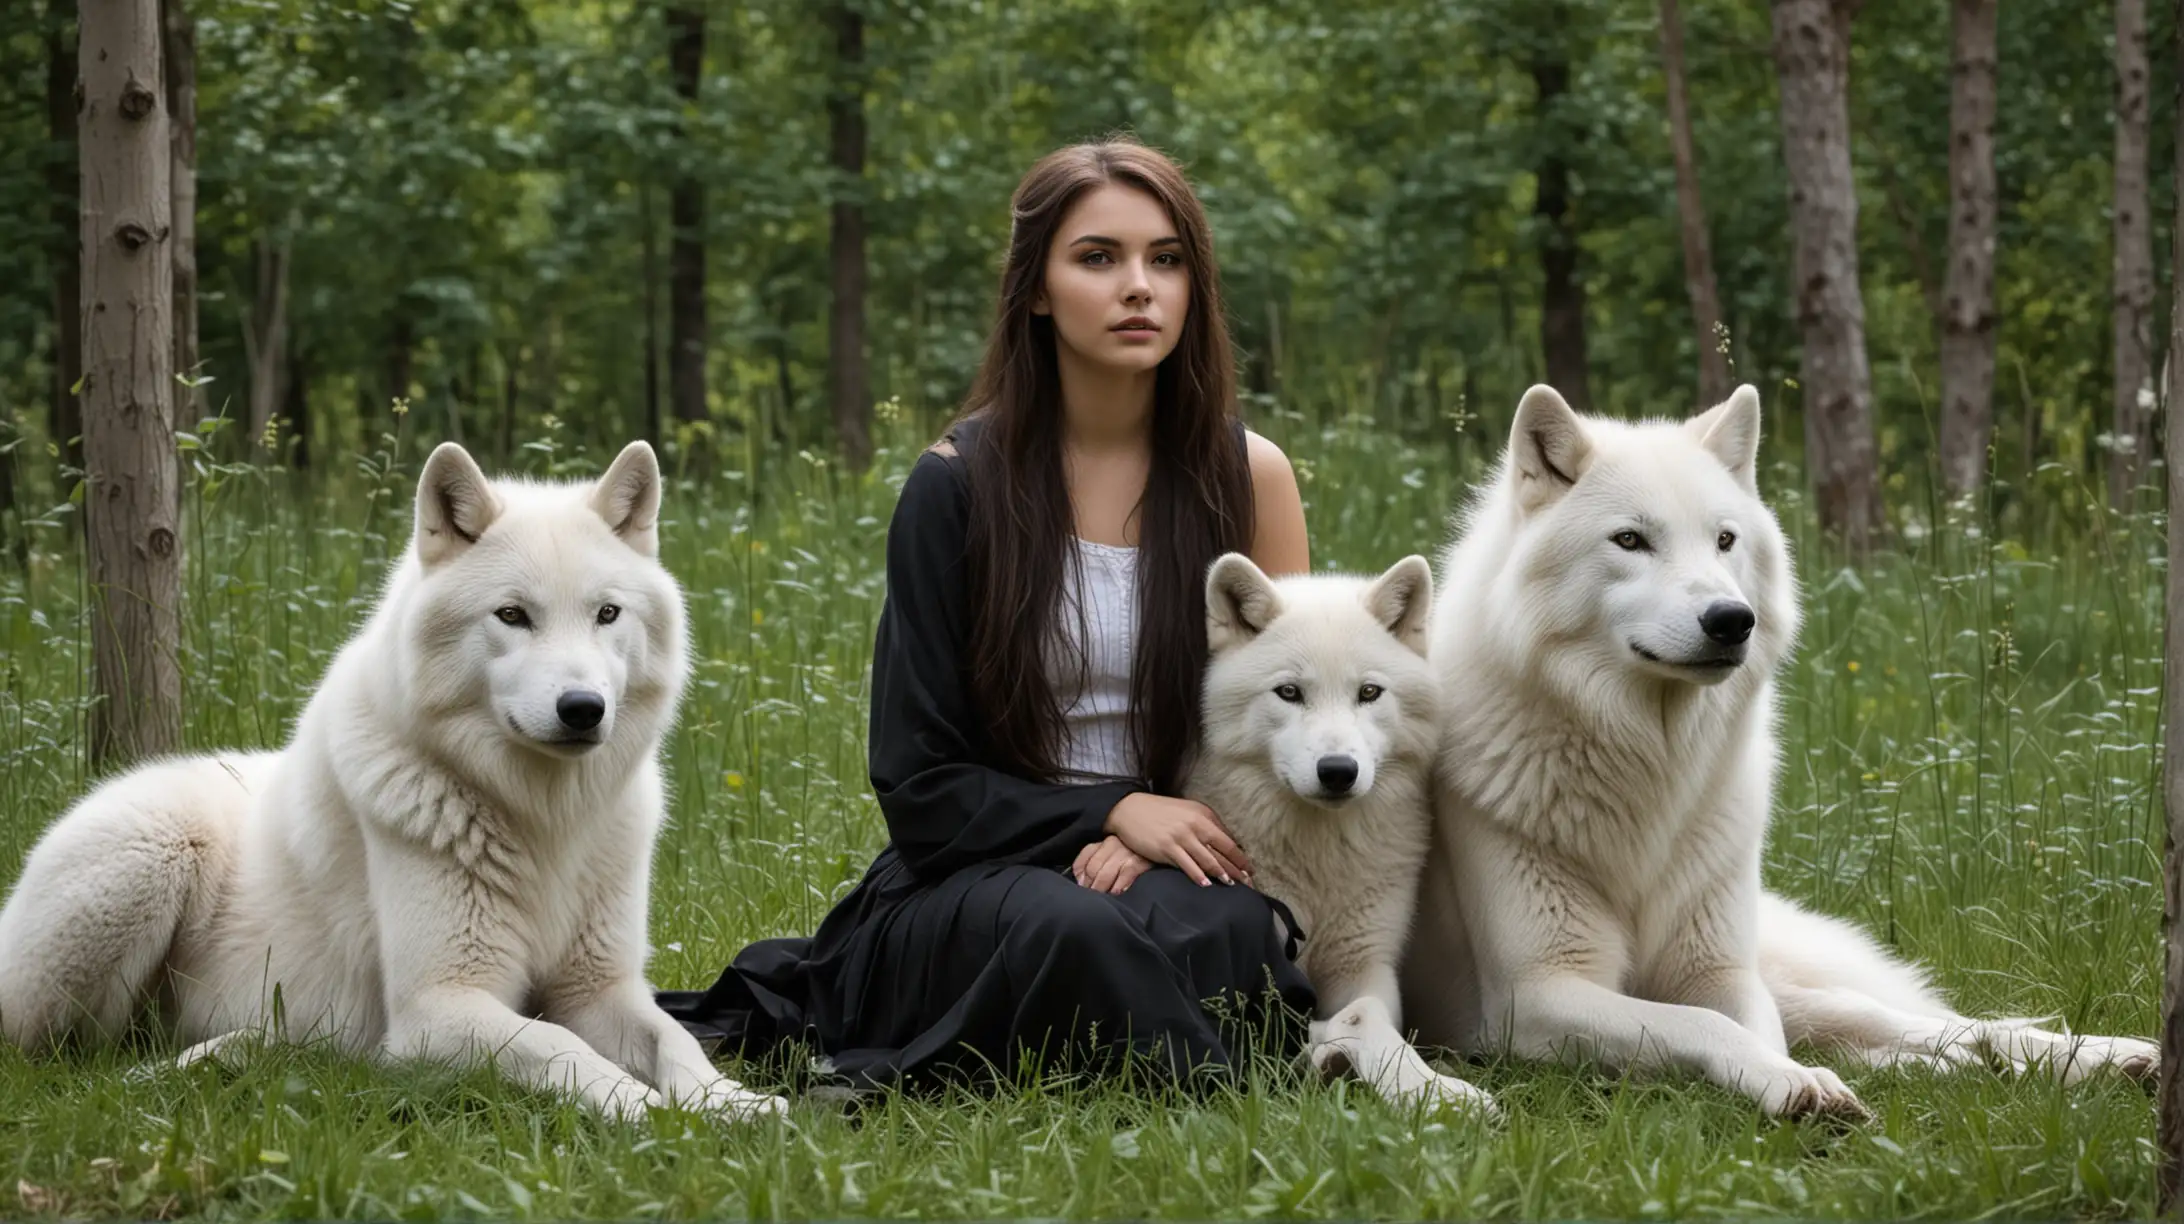 Young Girls Sitting Among White and Black Wolves in Forest Grass